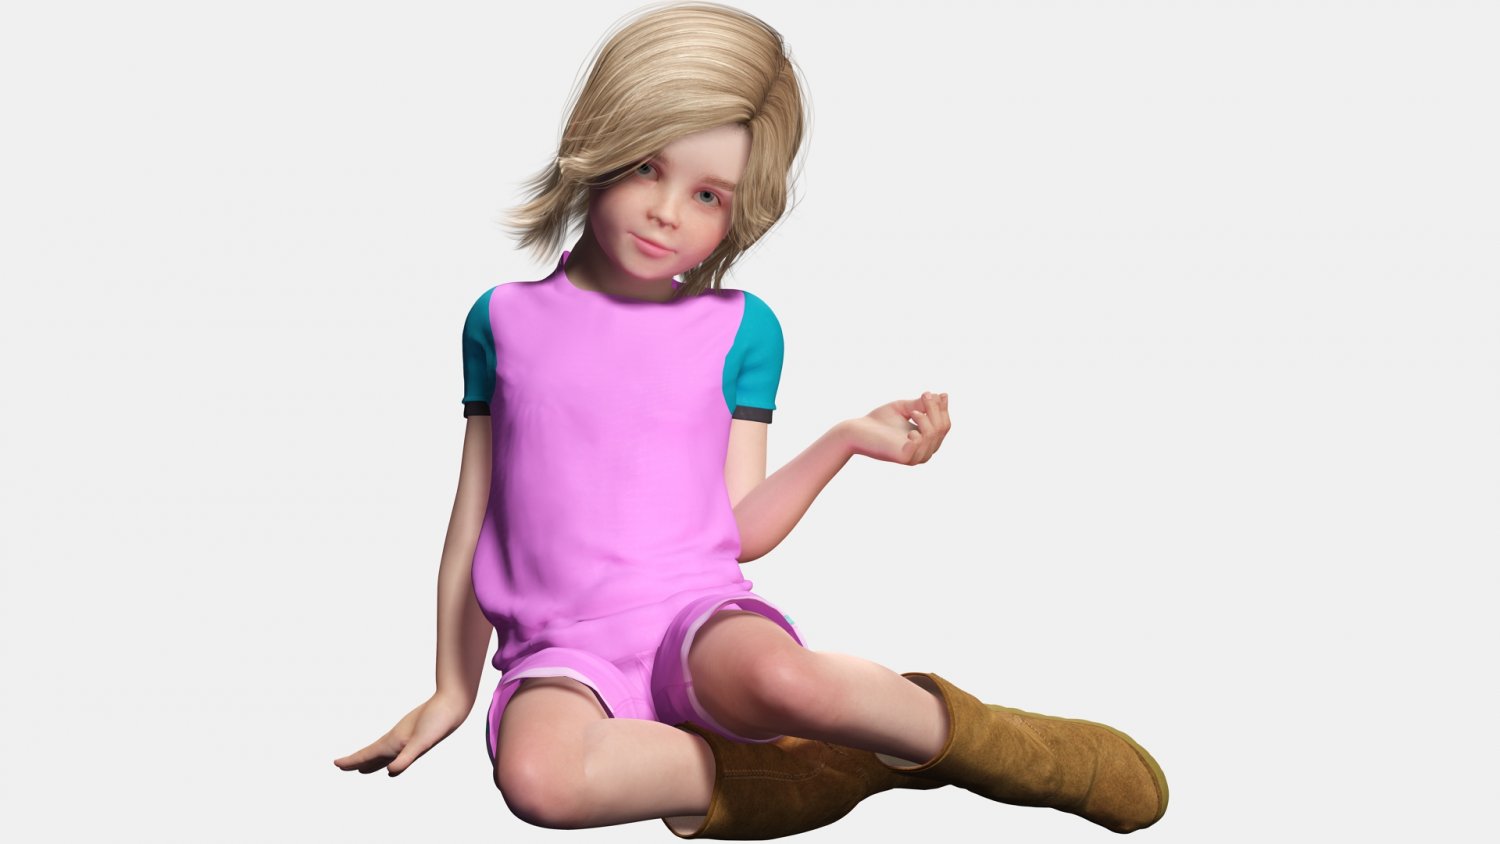 Download A 3d Model Of A Girl Sitting On A Bench Wallpaper